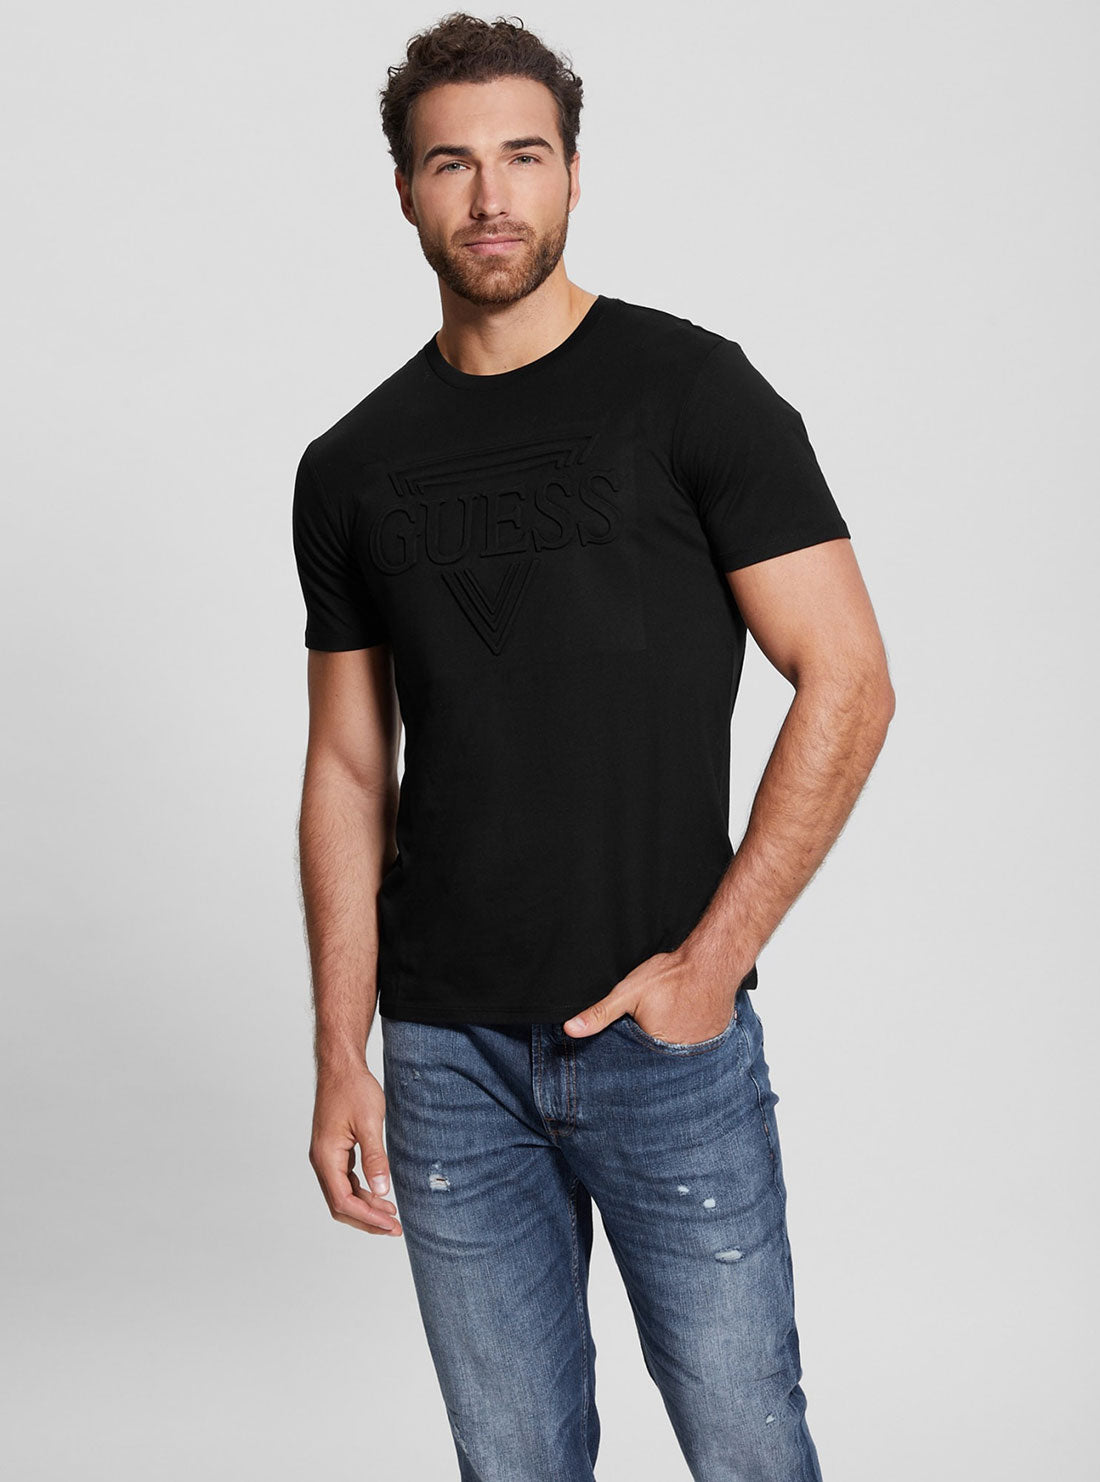 Eco Black Embossed Logo T-Shirt | GUESS Men's | Front view